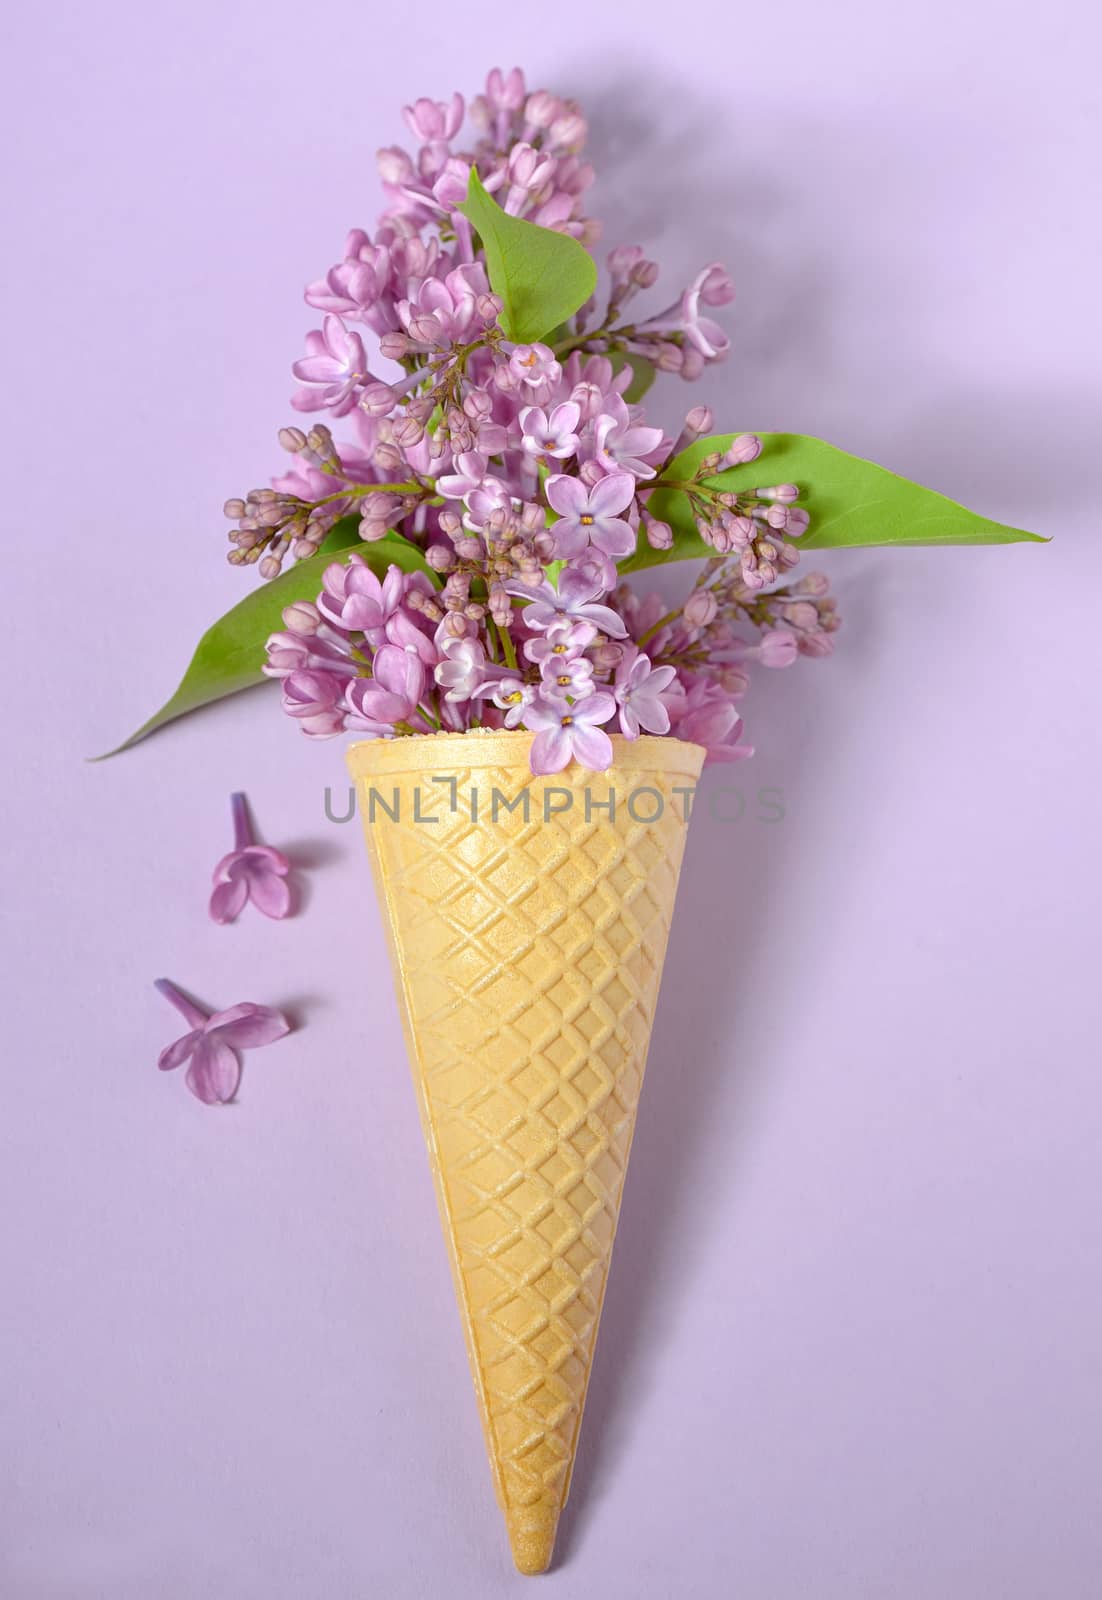 Abstract lilac in cone  by jordachelr